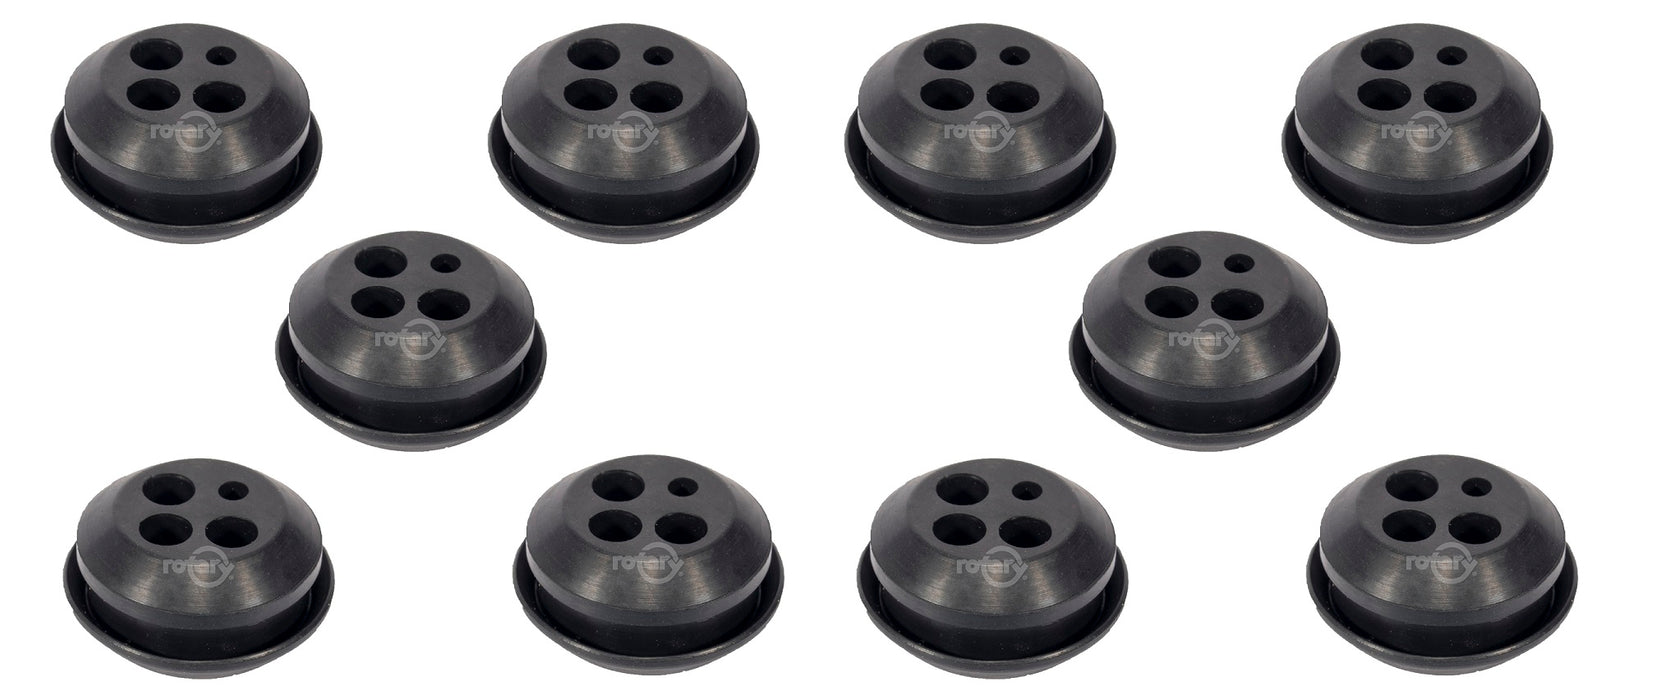 10 Pack Rotary 12606 Fuel Line Grommet 4 Hole Fits Echo 13211555930